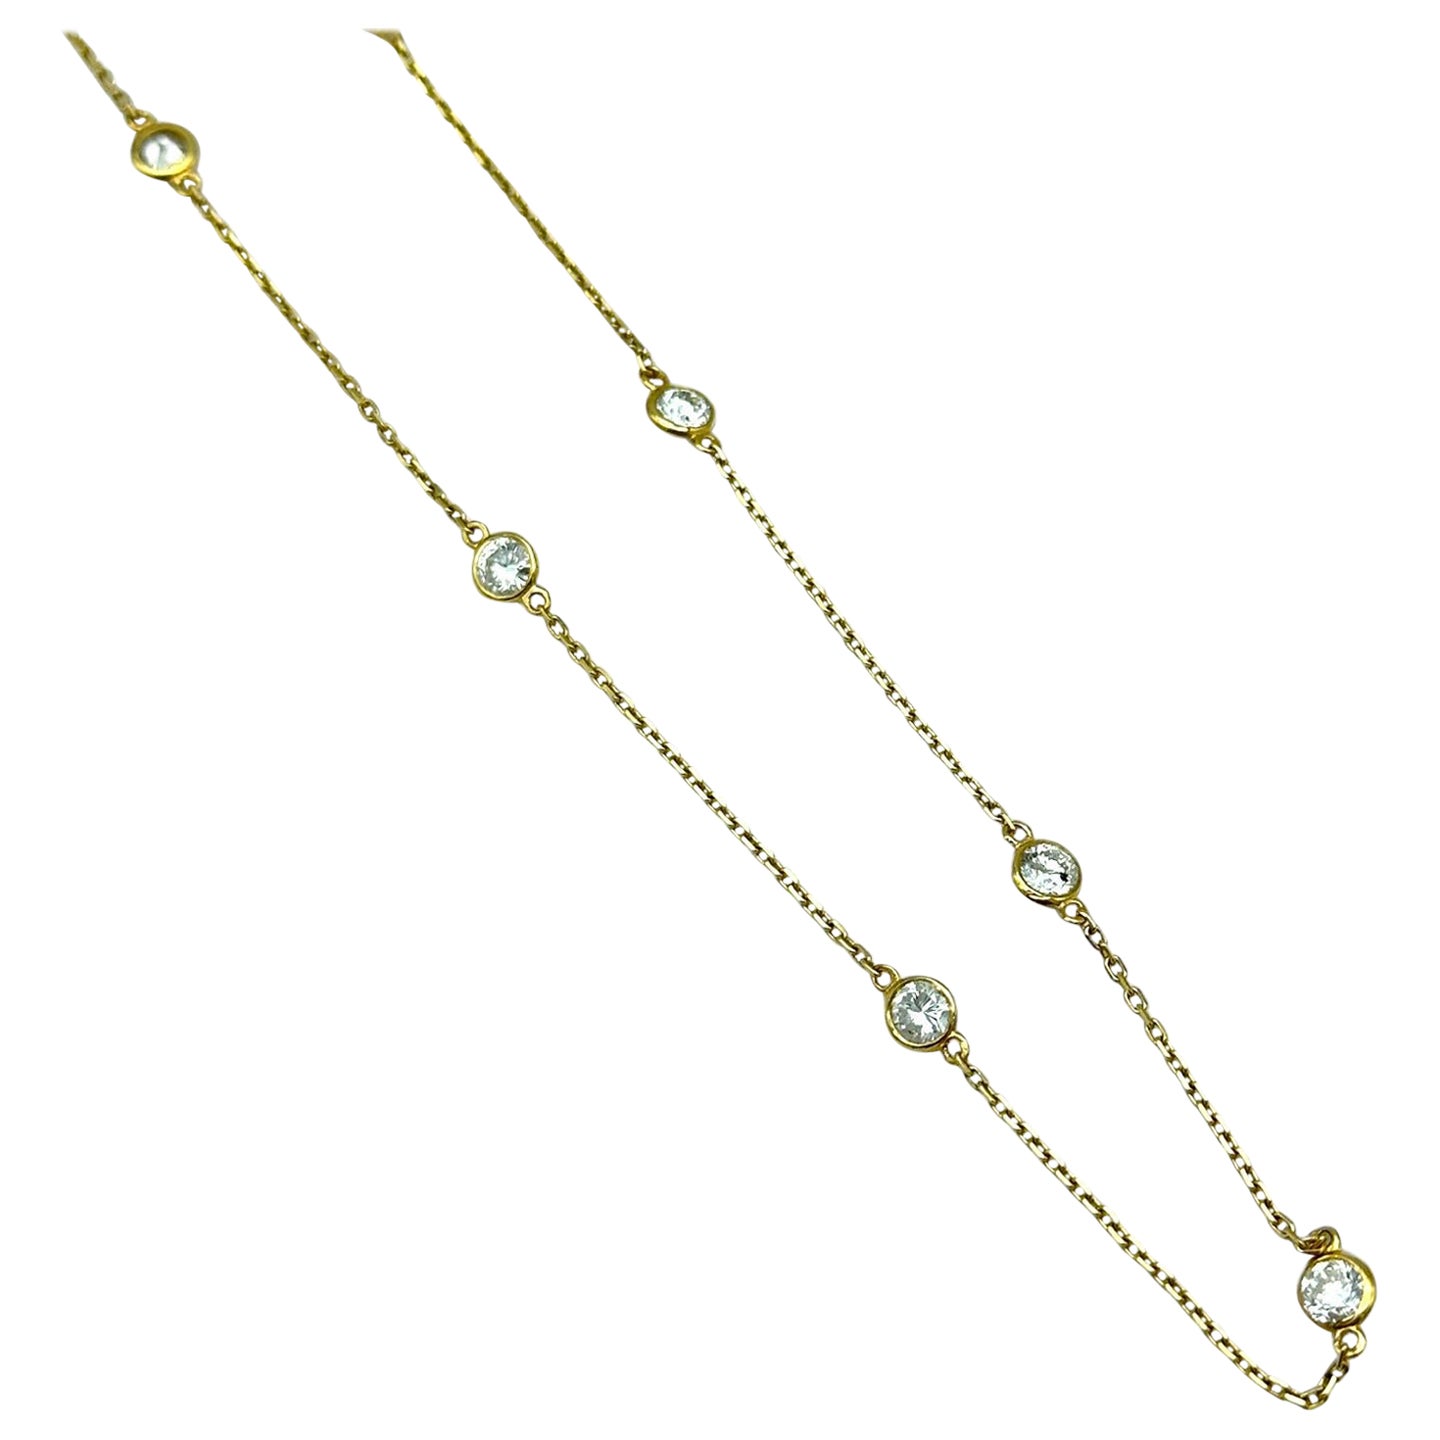 14K 1 3/4 CTW Natural Diamond 7-Station 24" Necklace ( Pink, White or Yellow )